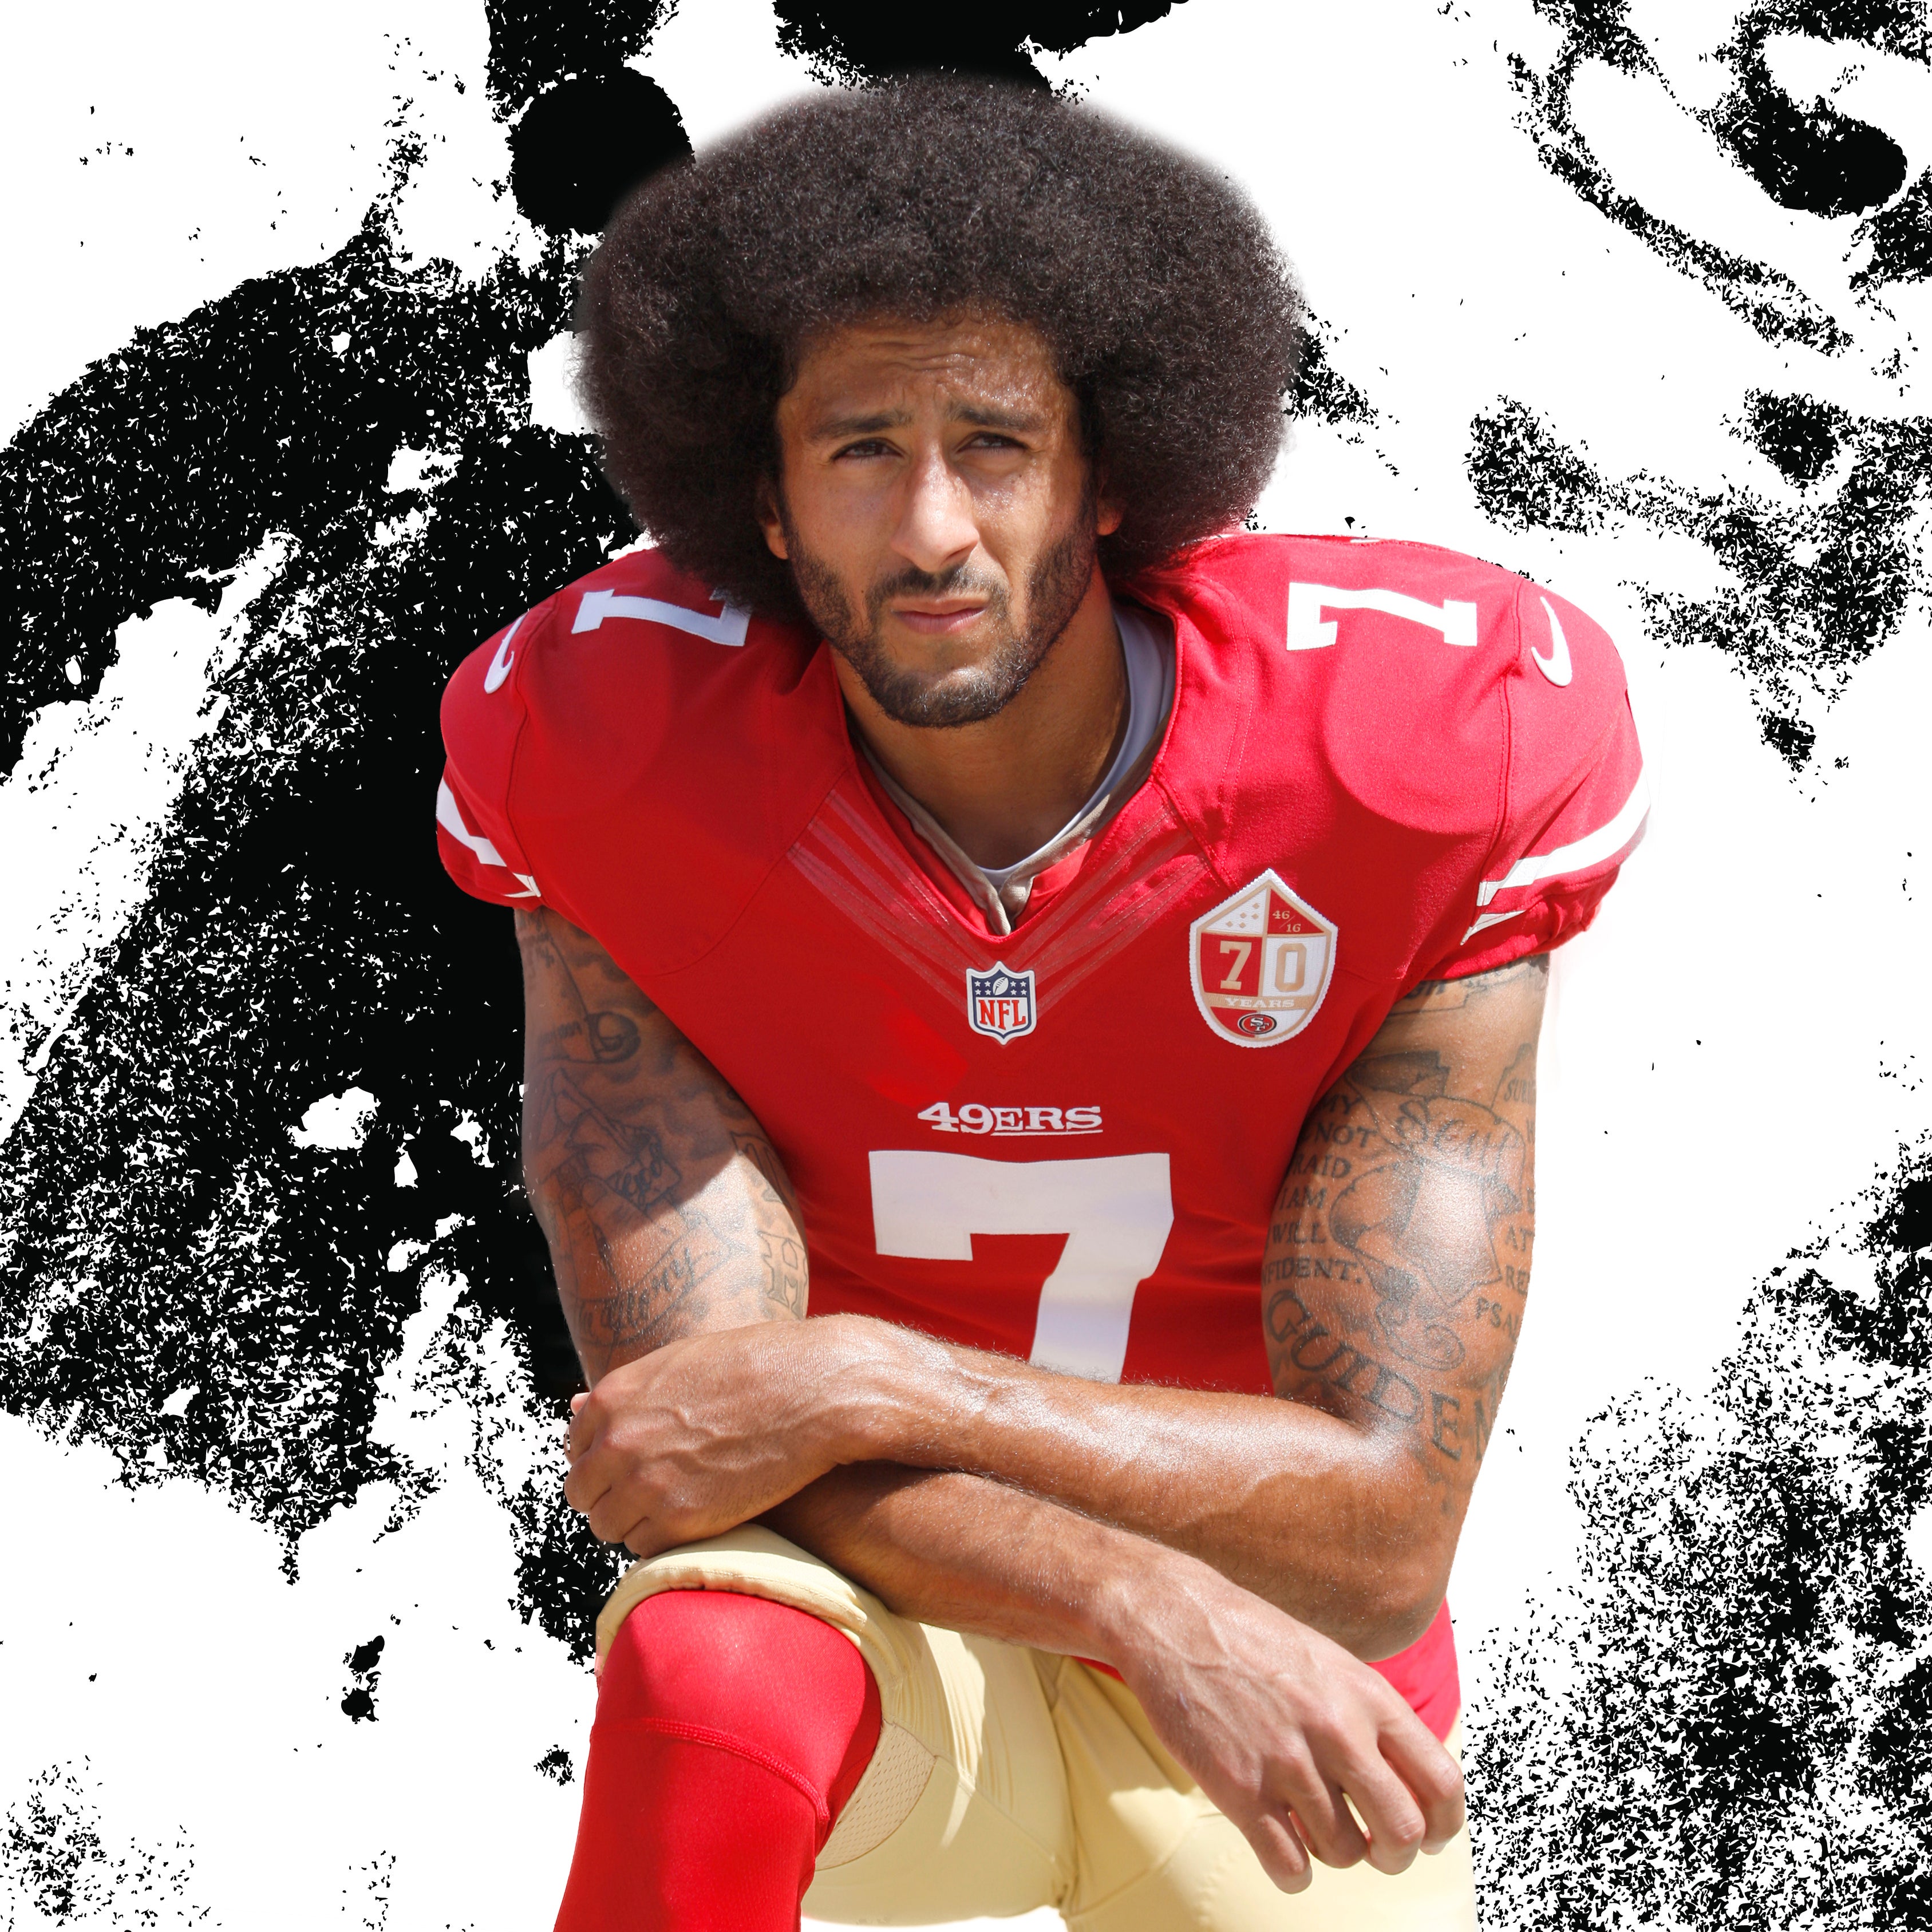 The Quick Read: Colin Kaepernick's Lawyer Thinks He'll Be Signed Within 10 Days
